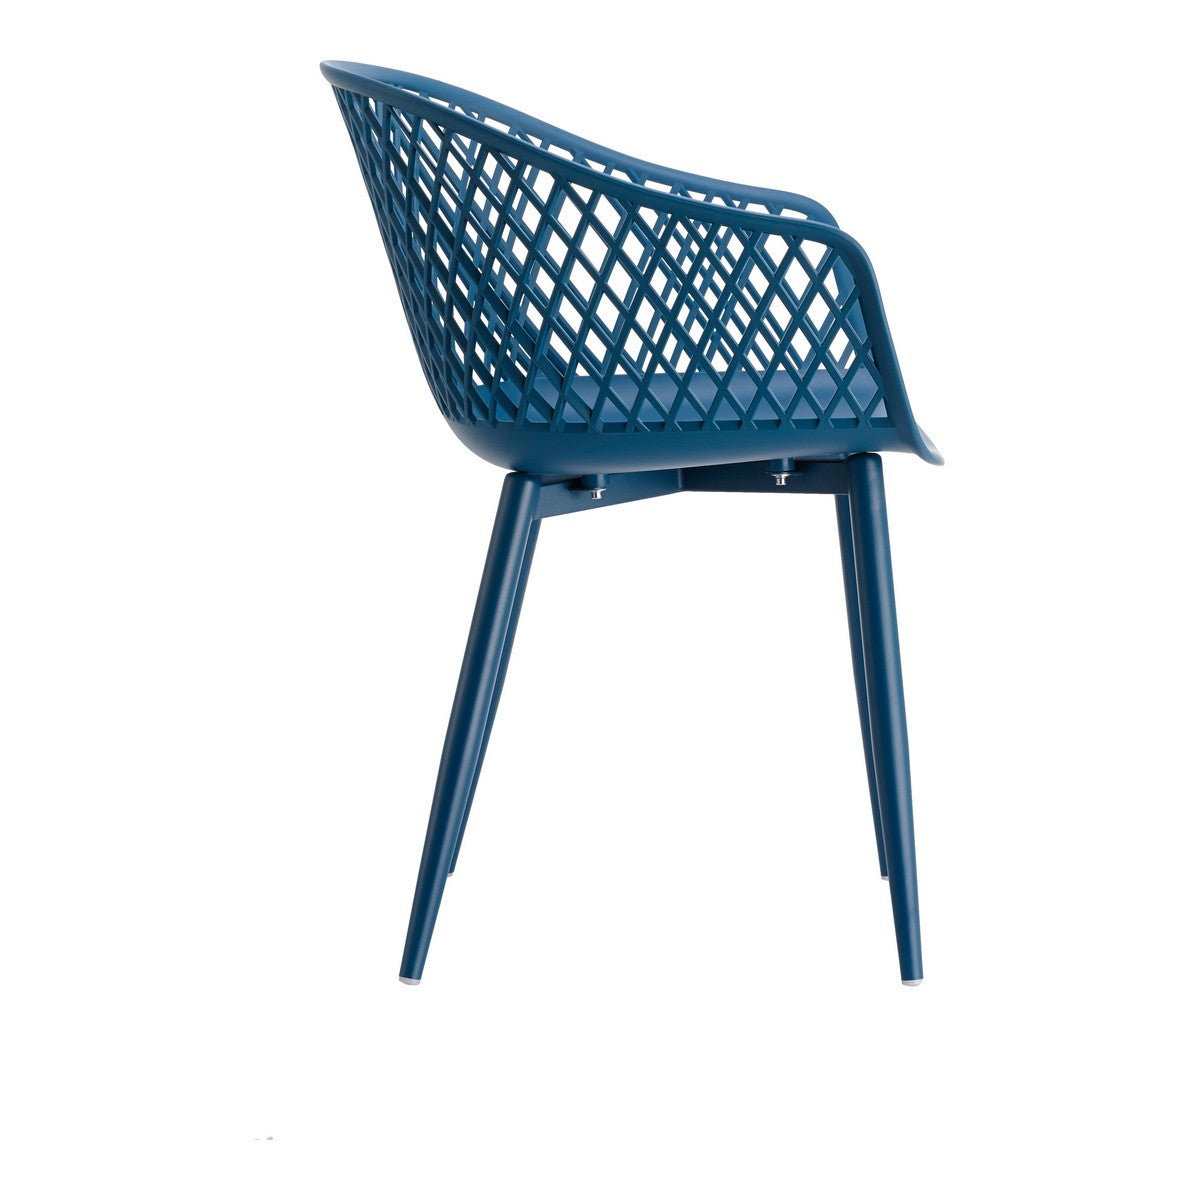 Moe's Home Collection Piazza Outdoor Chair Blue-Set of Two - QX-1001-26